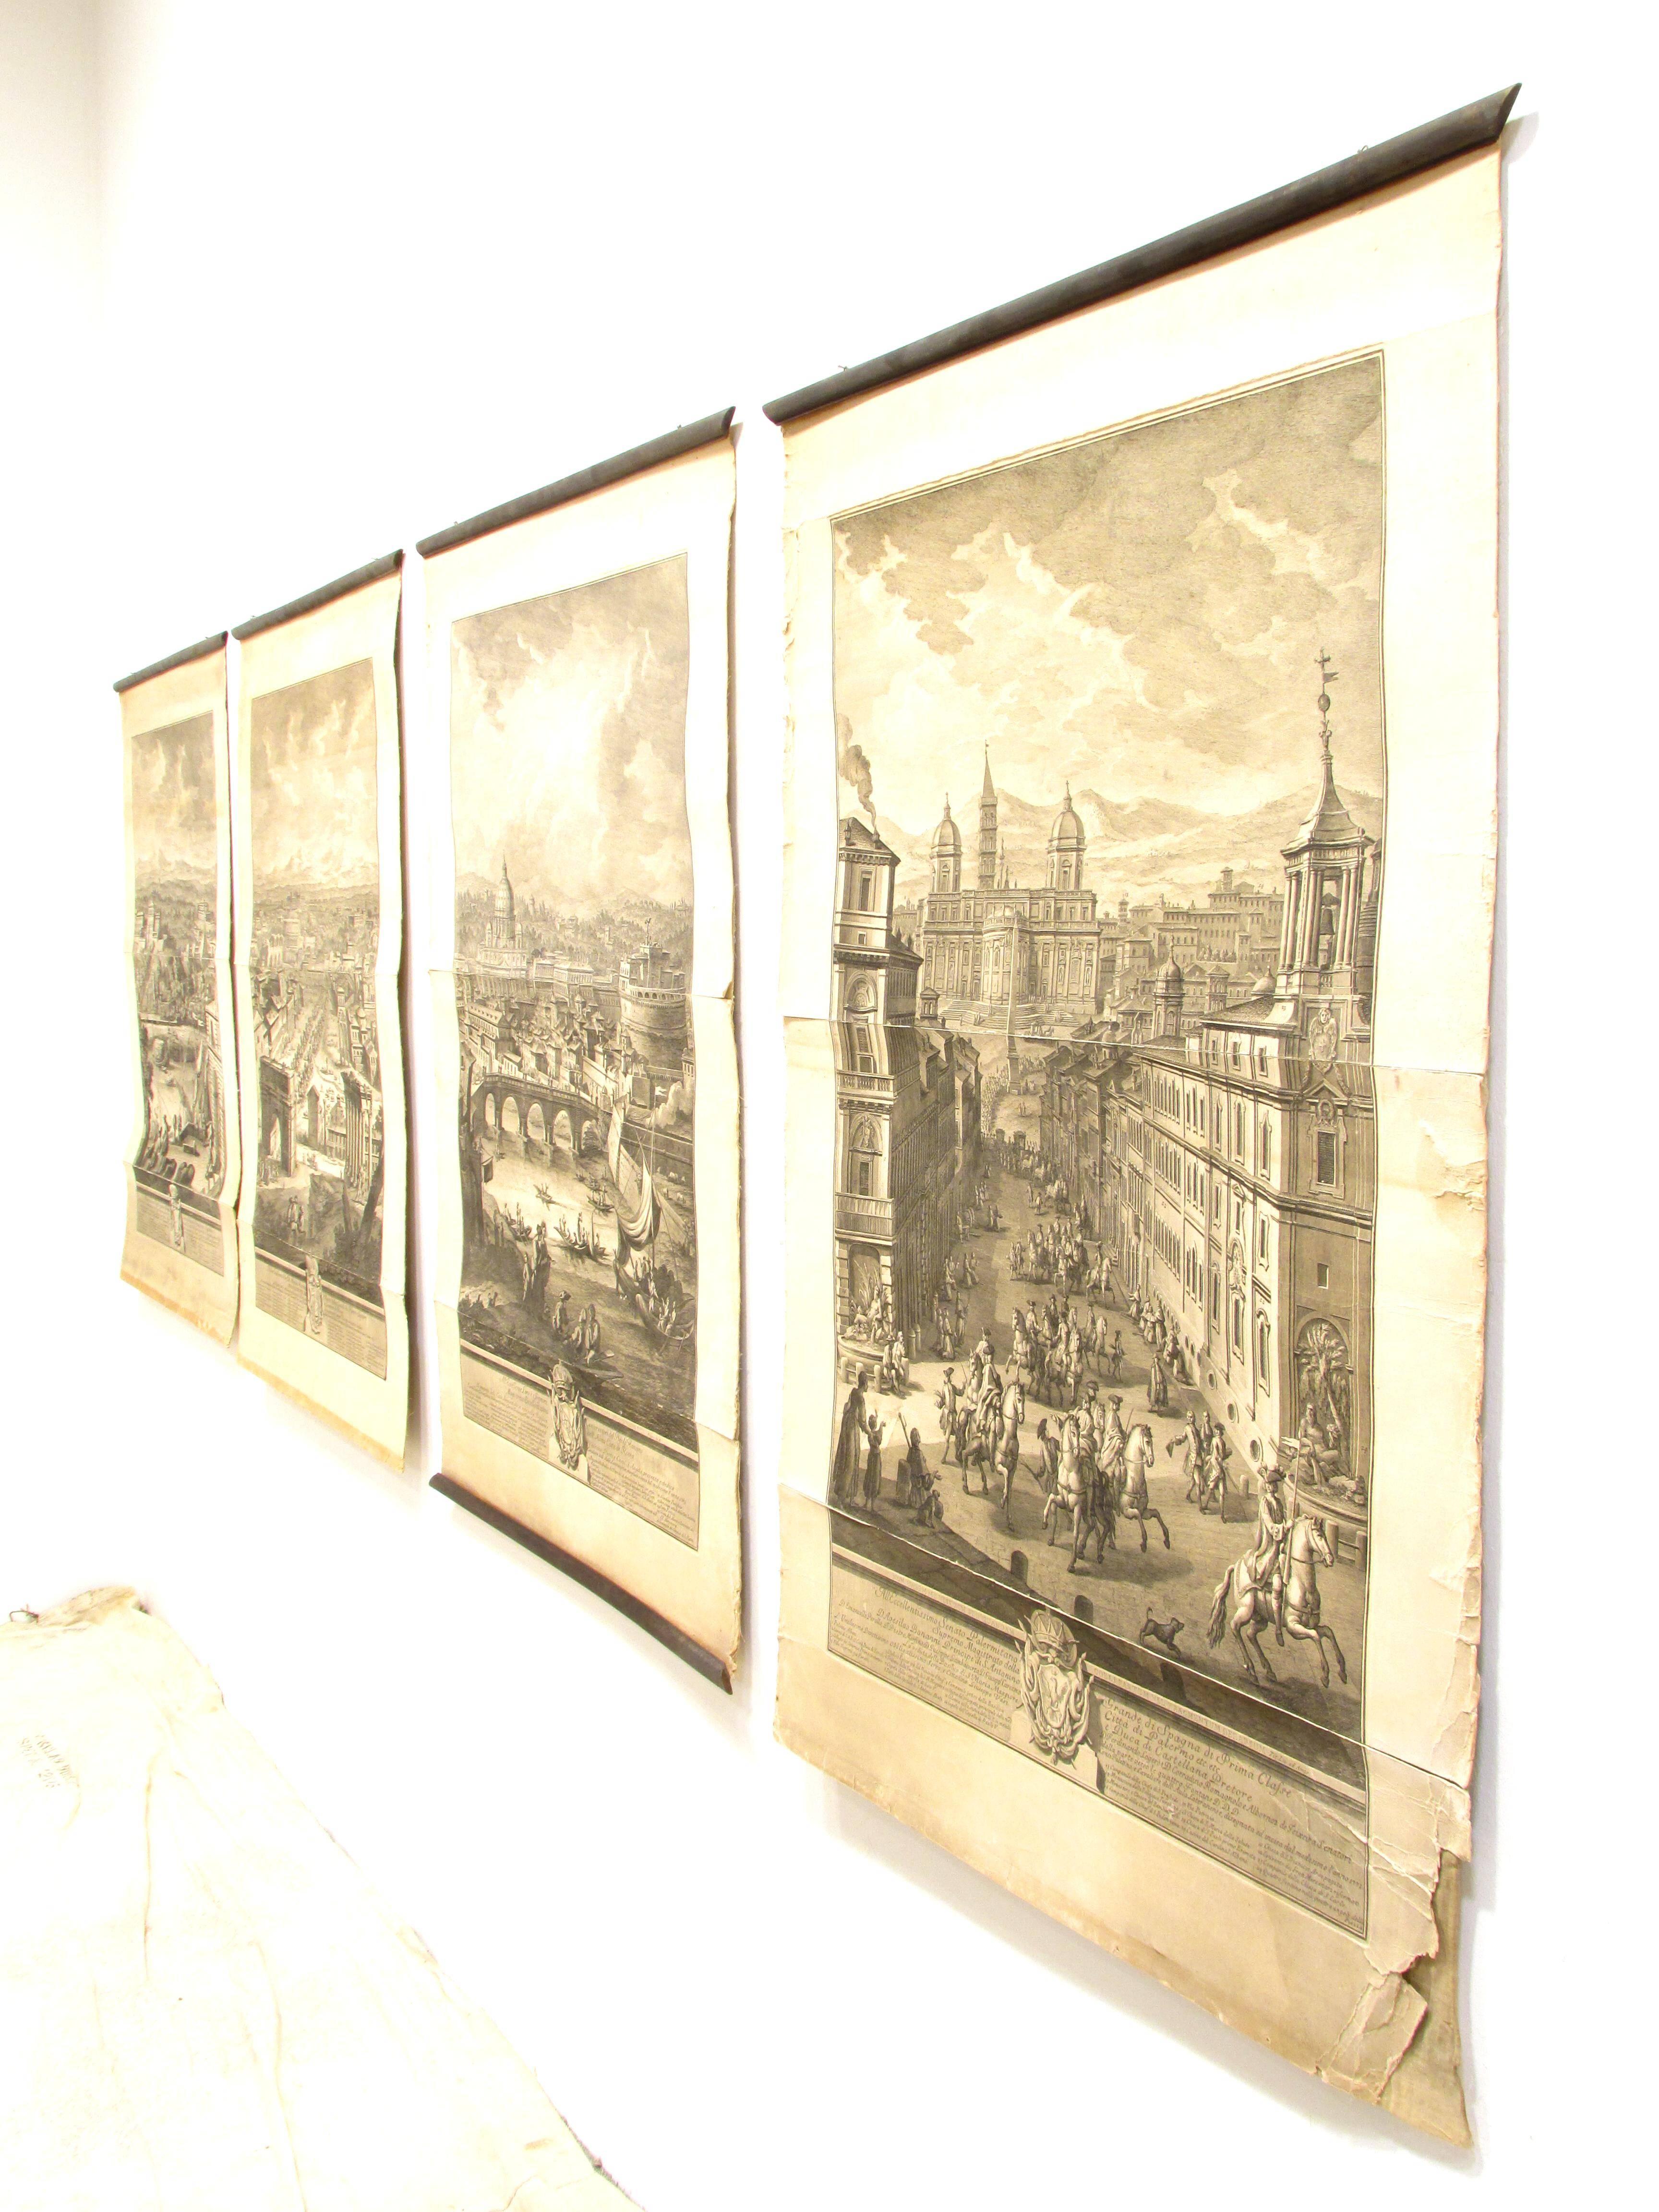 Set of four very large etchings by Giuseppe Vasi (1710-1782) depicting different views of Rome:
Grand view of the Aventine Hill 
Grand view of Campo Vaccino
Grand view of the Vatican City
Grand view of S. Maria Maggiore 
each etching consist of